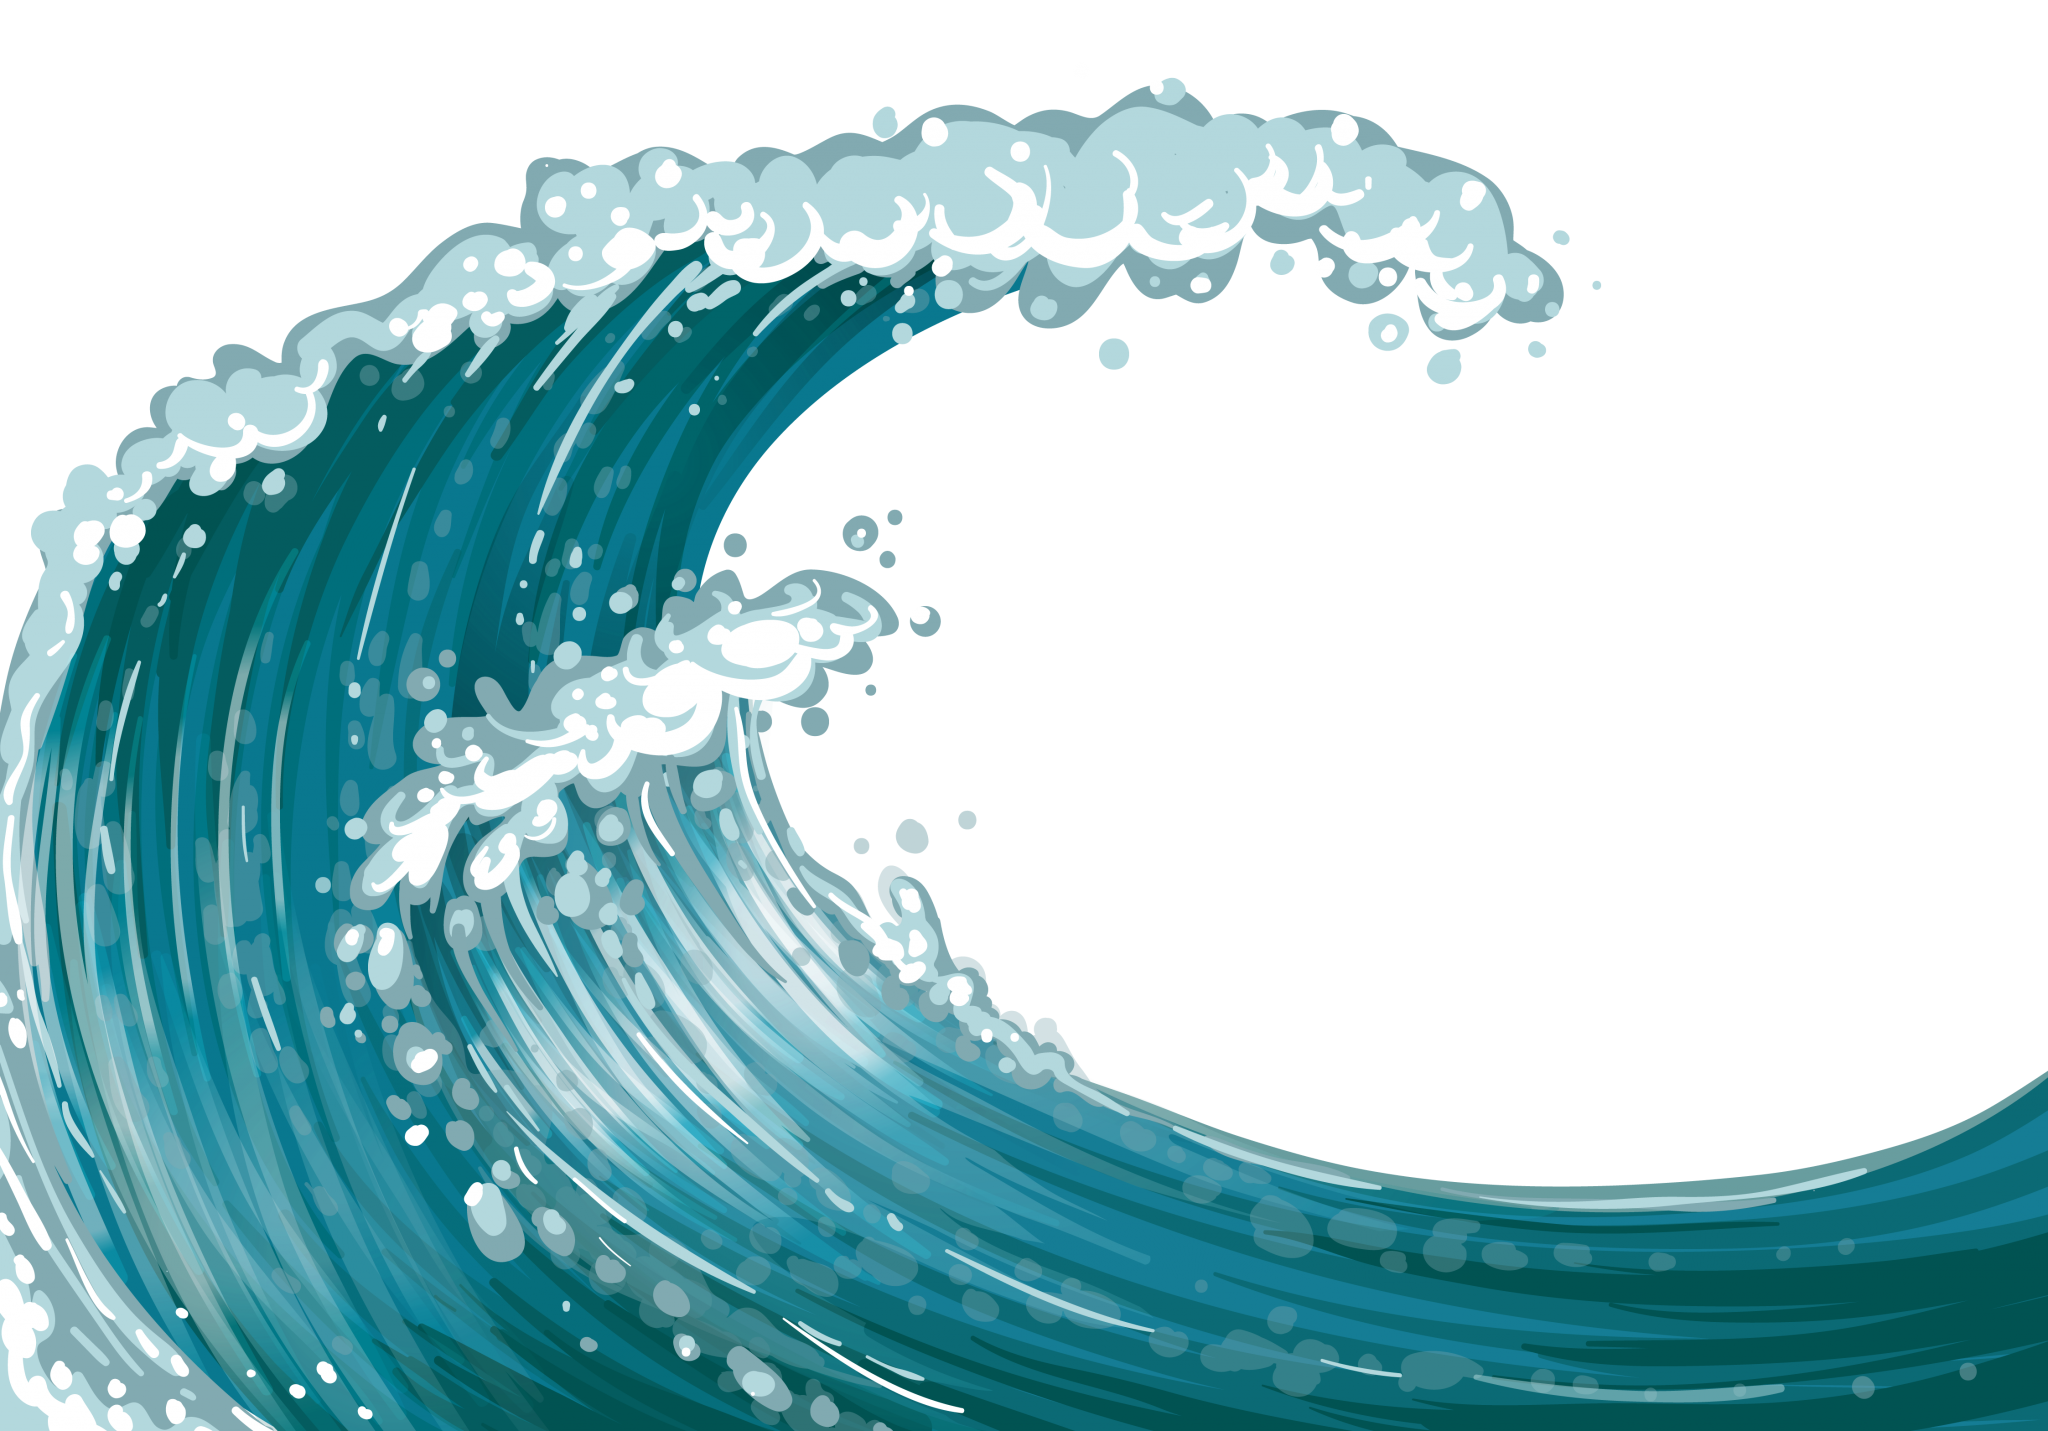 Png hd transparent images. Waves clipart clear background